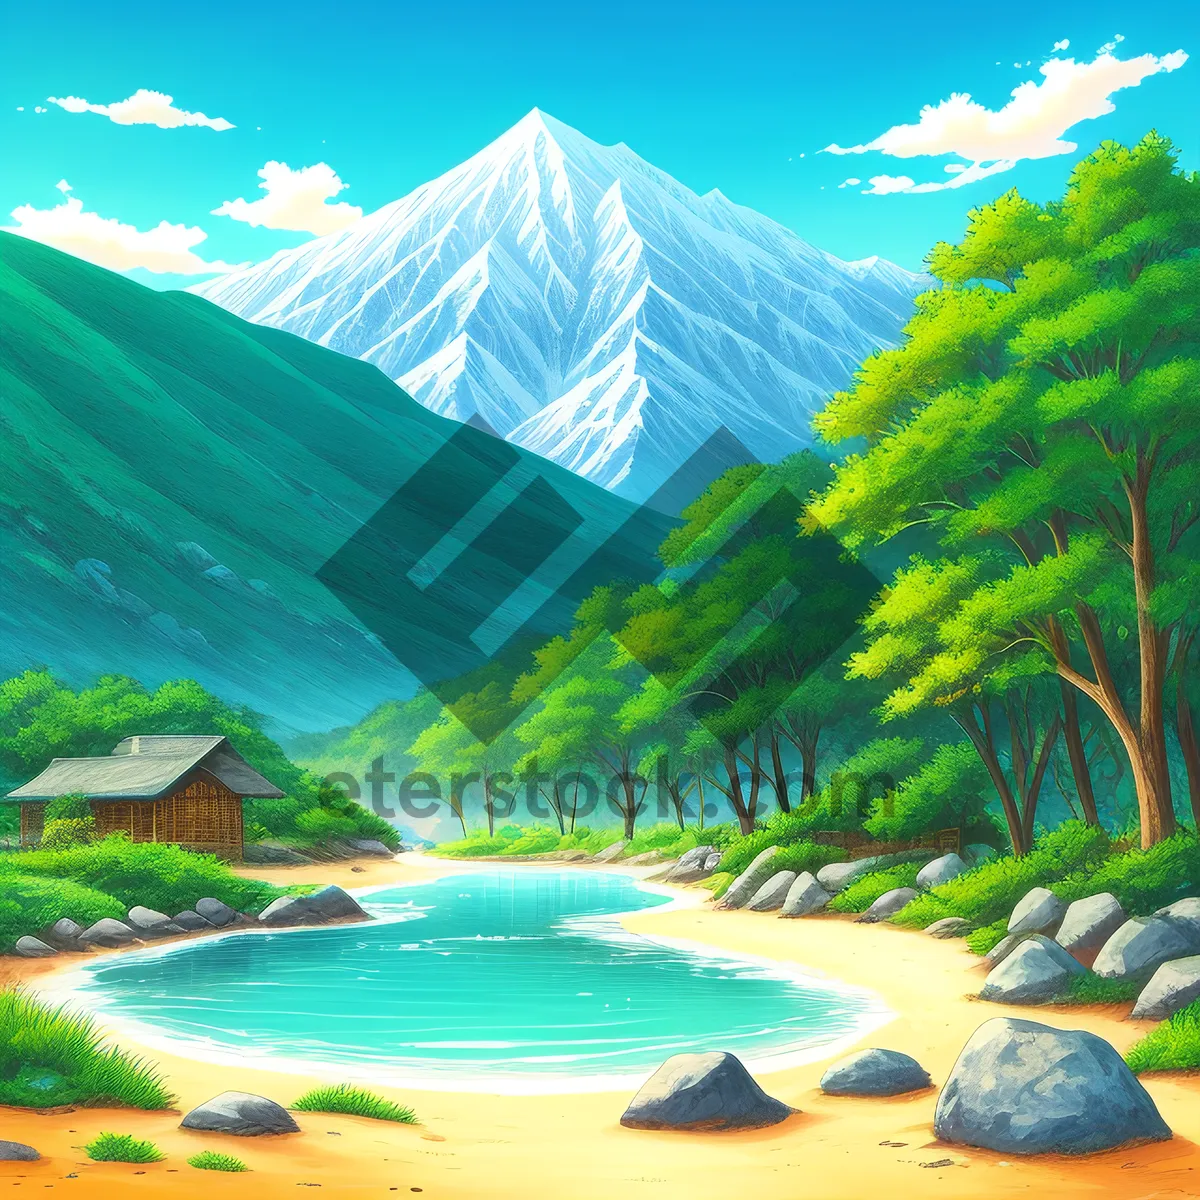 Picture of Serene Lake amidst Majestic Mountains in Summer